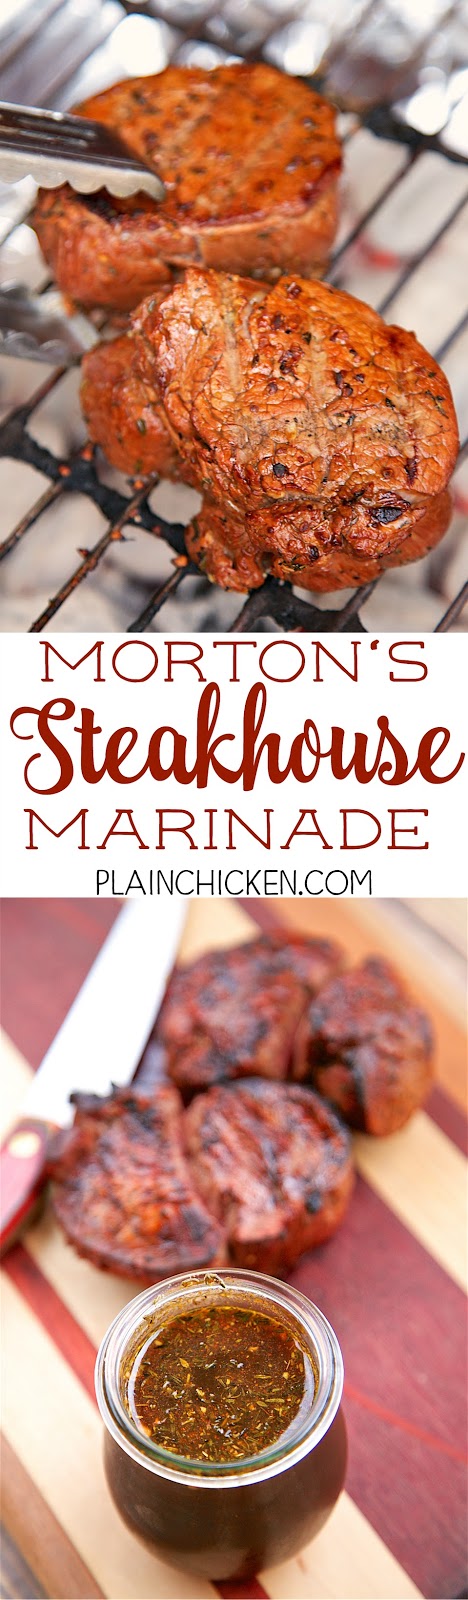 Morton's Steakhouse Marinade - recipe from the famous steakhouse. Garlic, thyme, cayenne pepper, soy sauce, Worcestershire sauce, oil, lime juice, salt and pepper. This makes THE BEST steaks EVER! I cleaned my plate, and I never do that! Seriously, the best steak I've ever eaten - better than any restaurant!